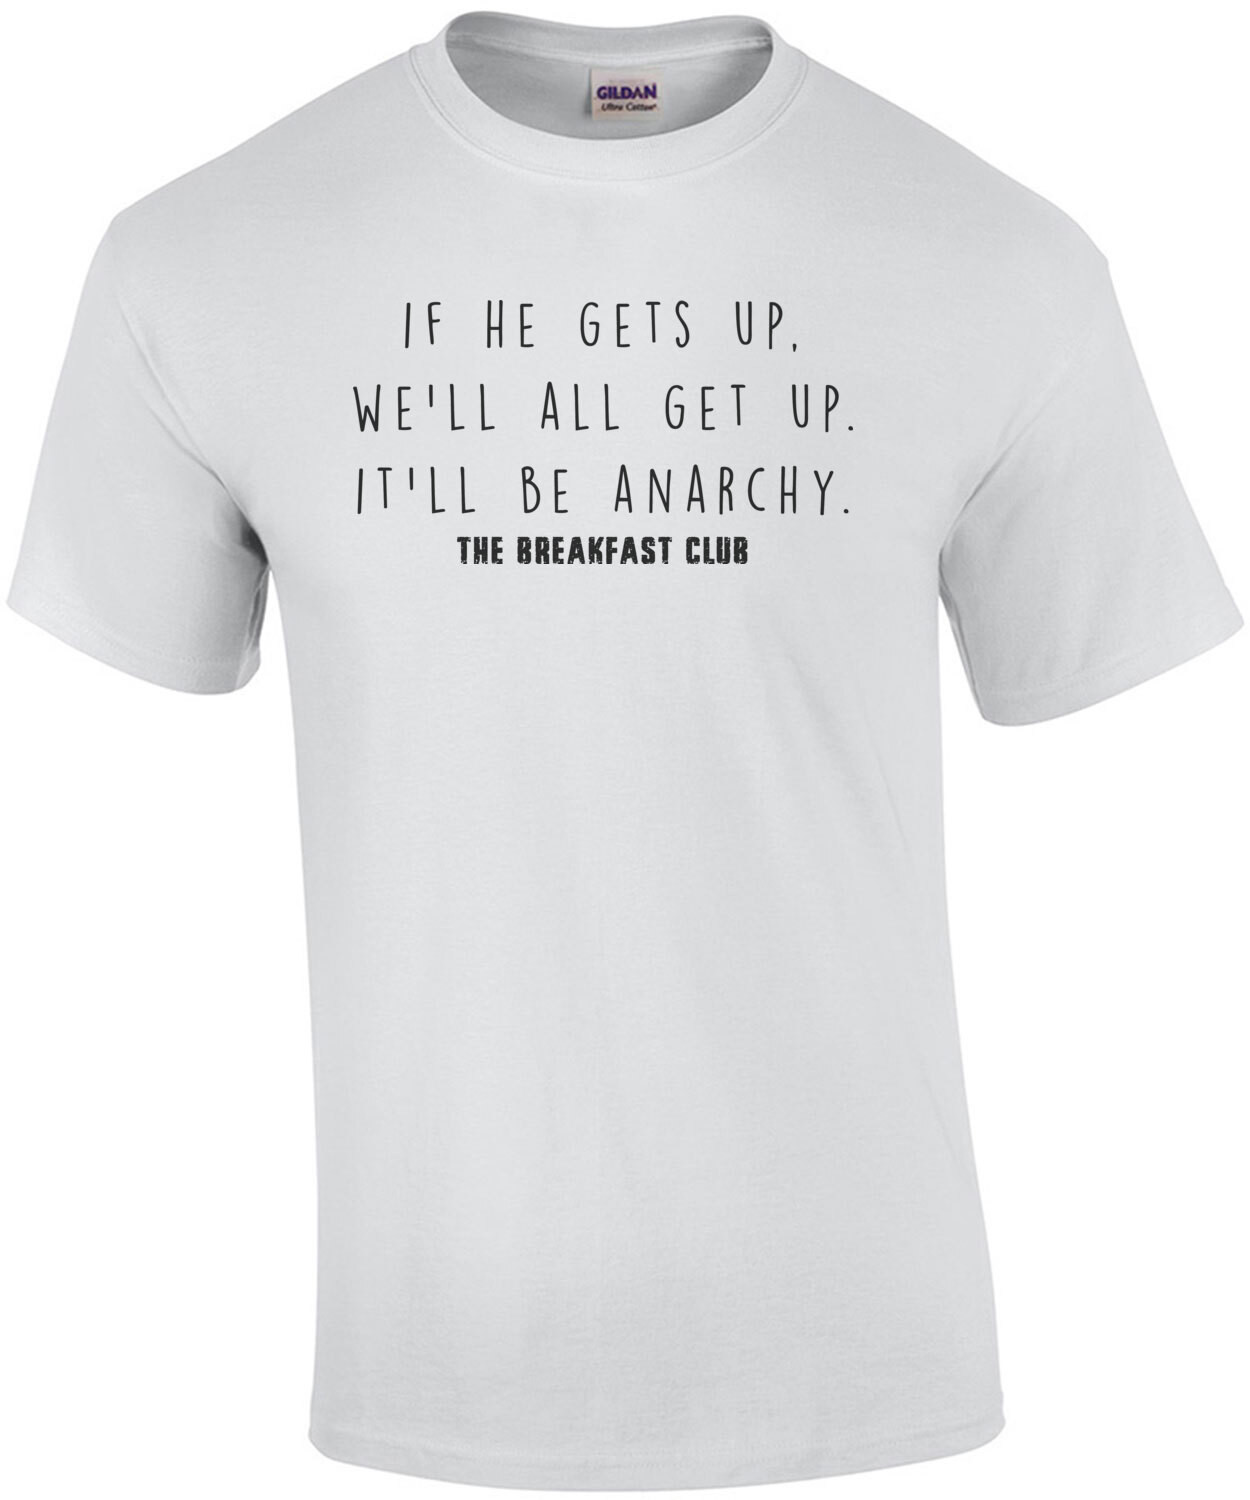 If he gets up, we'll all get up. It'll be anarchy. The Breakfast Club - 80's t-shirt